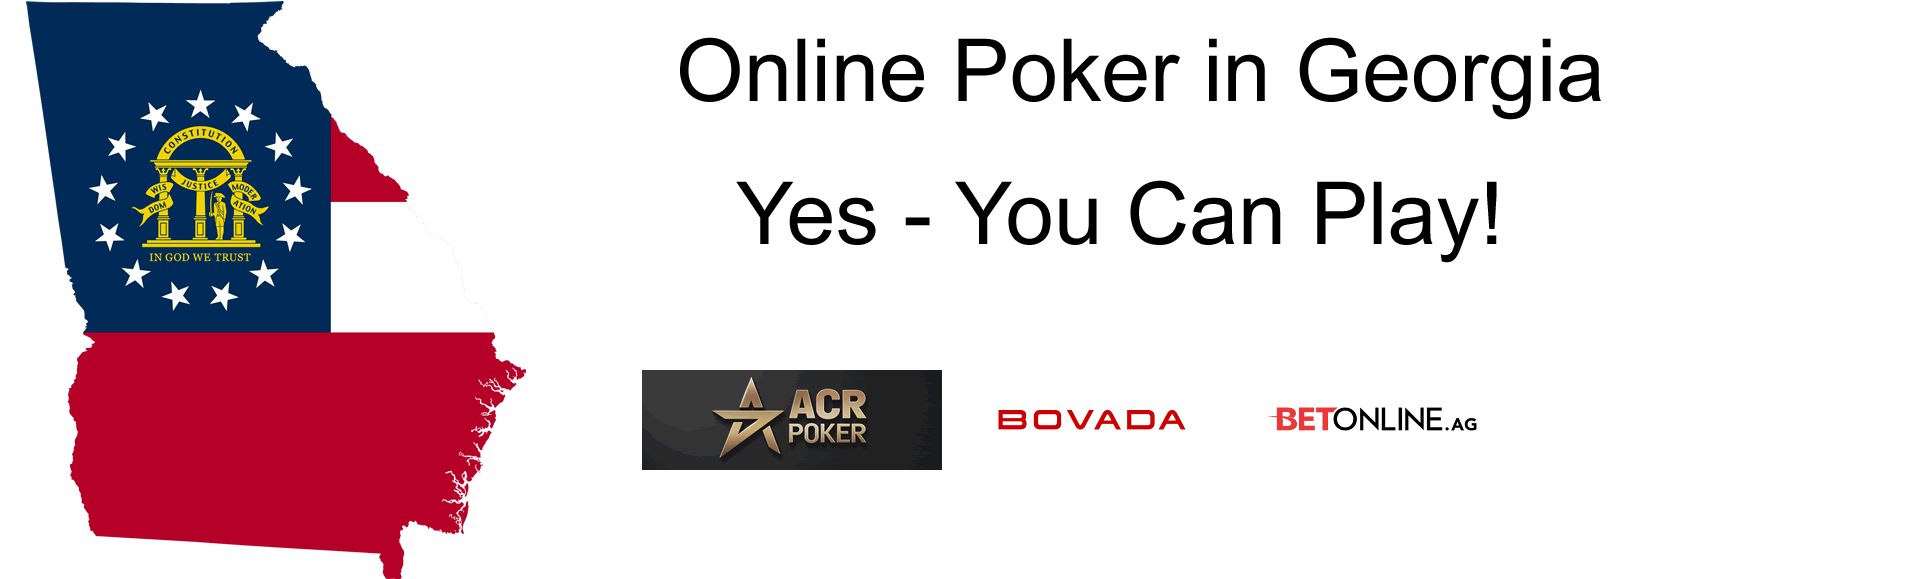 Online Poker Sites for Georgia Residents Can Legally Play